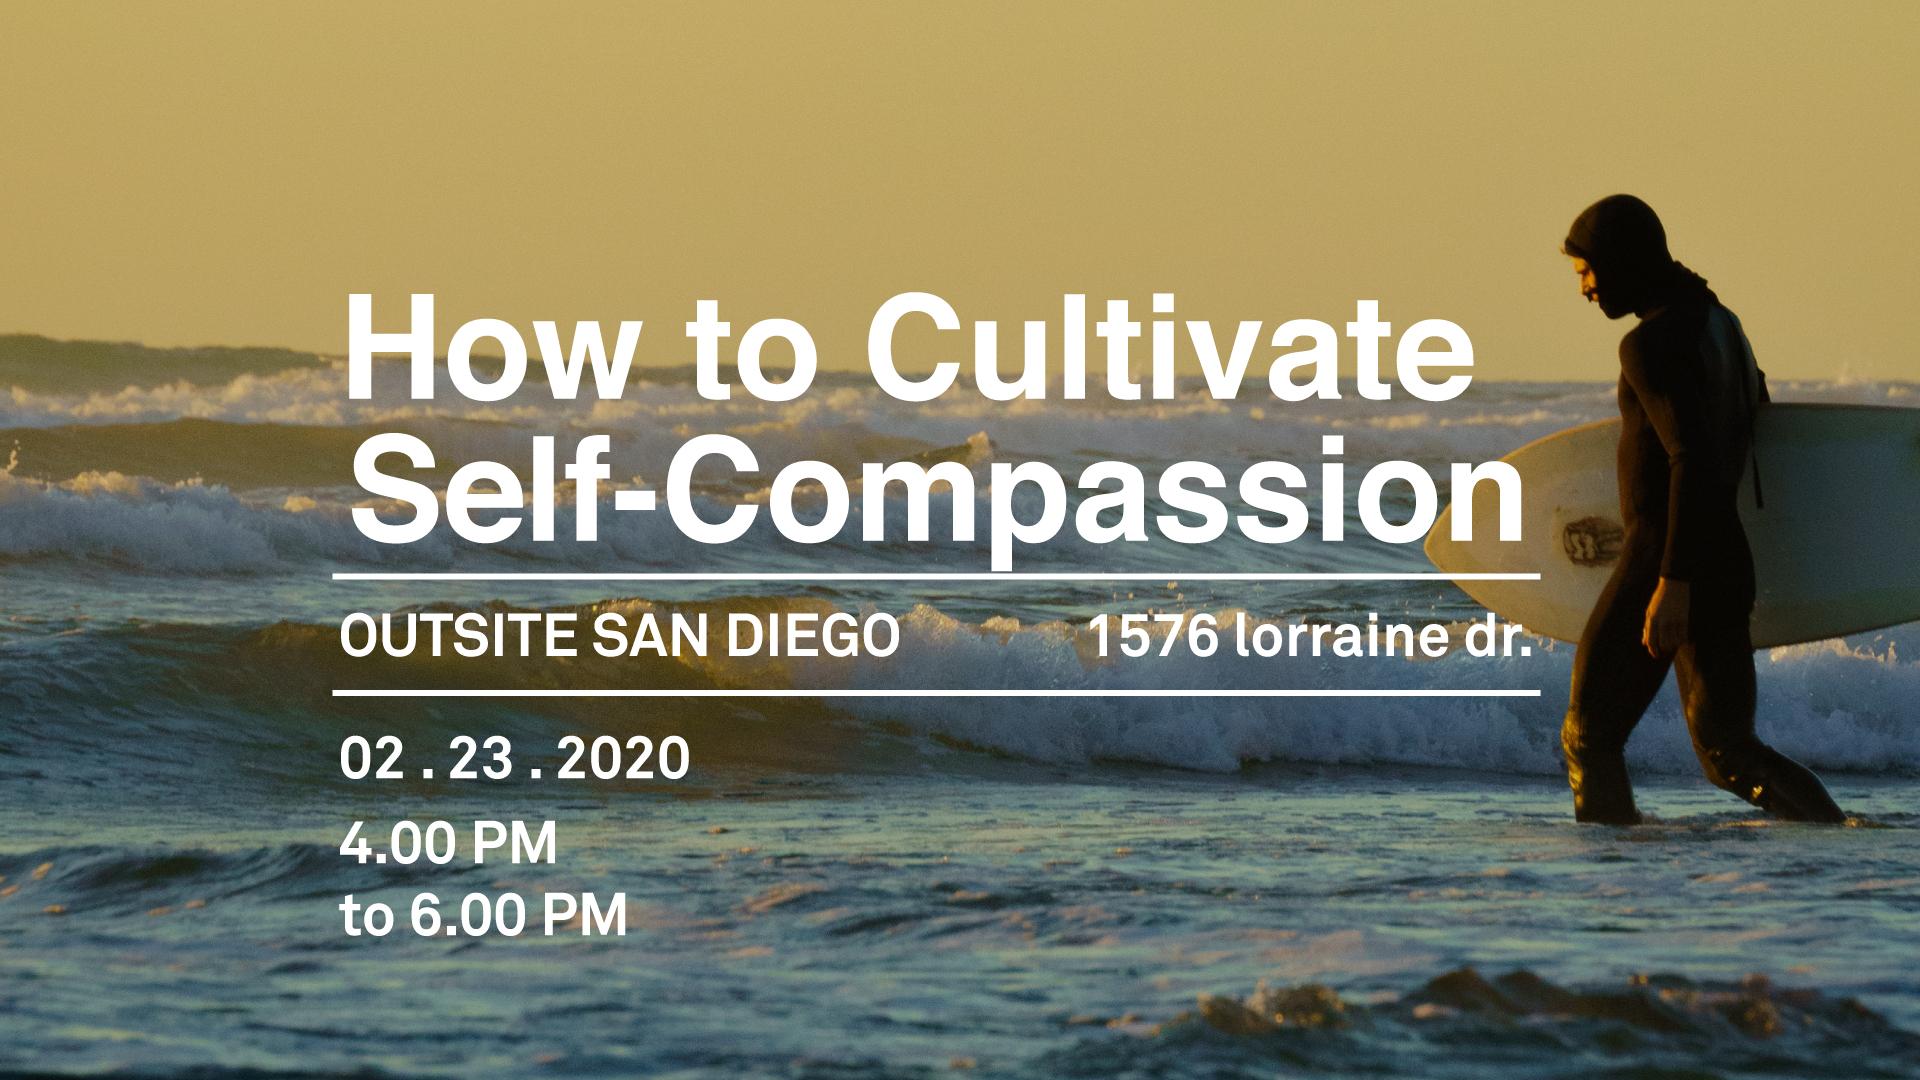 How to Cultivate Self-Compassion Workshop